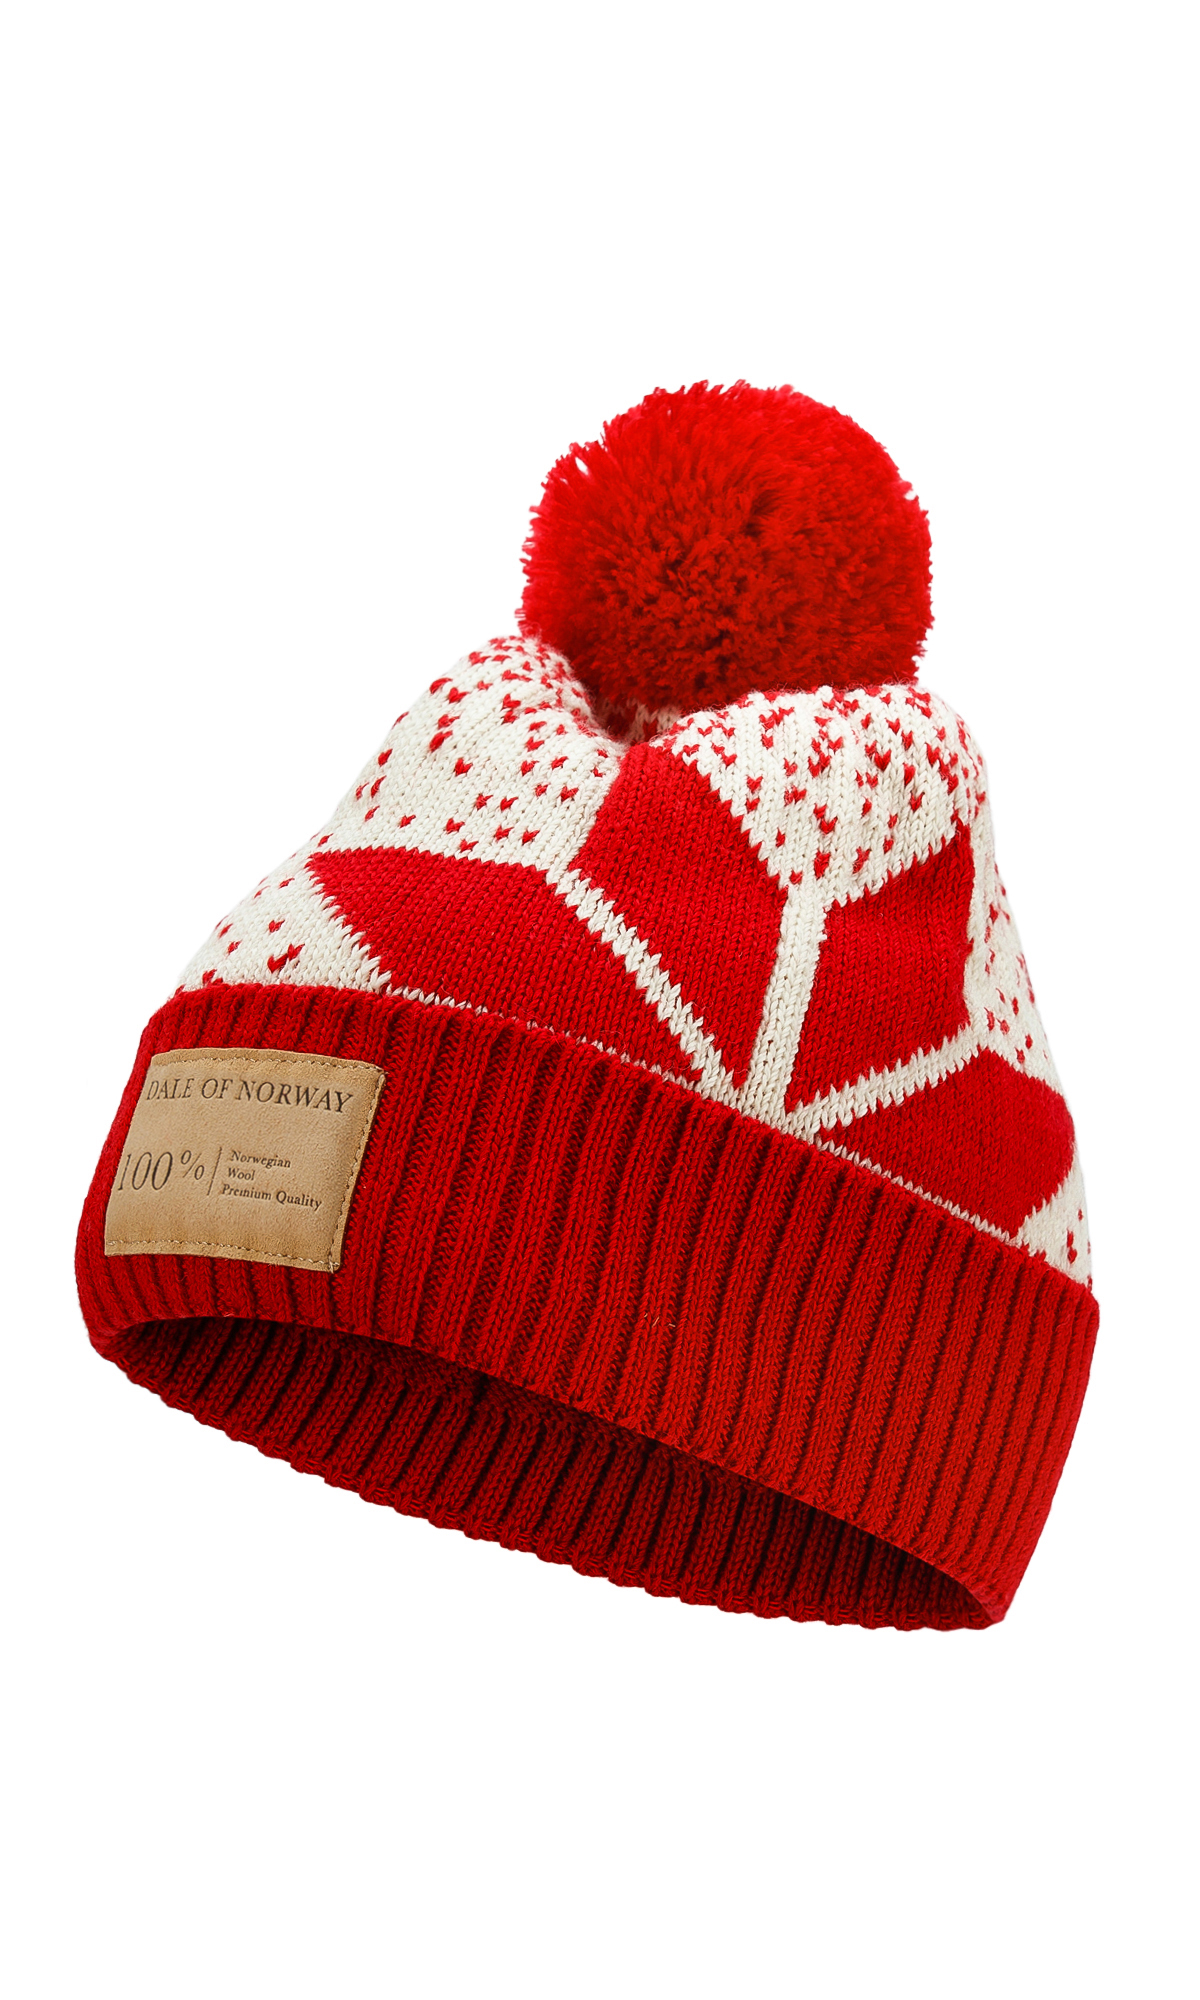 Winter Star hat - Unisex - Red - Dale of Norway - Dale of Norway